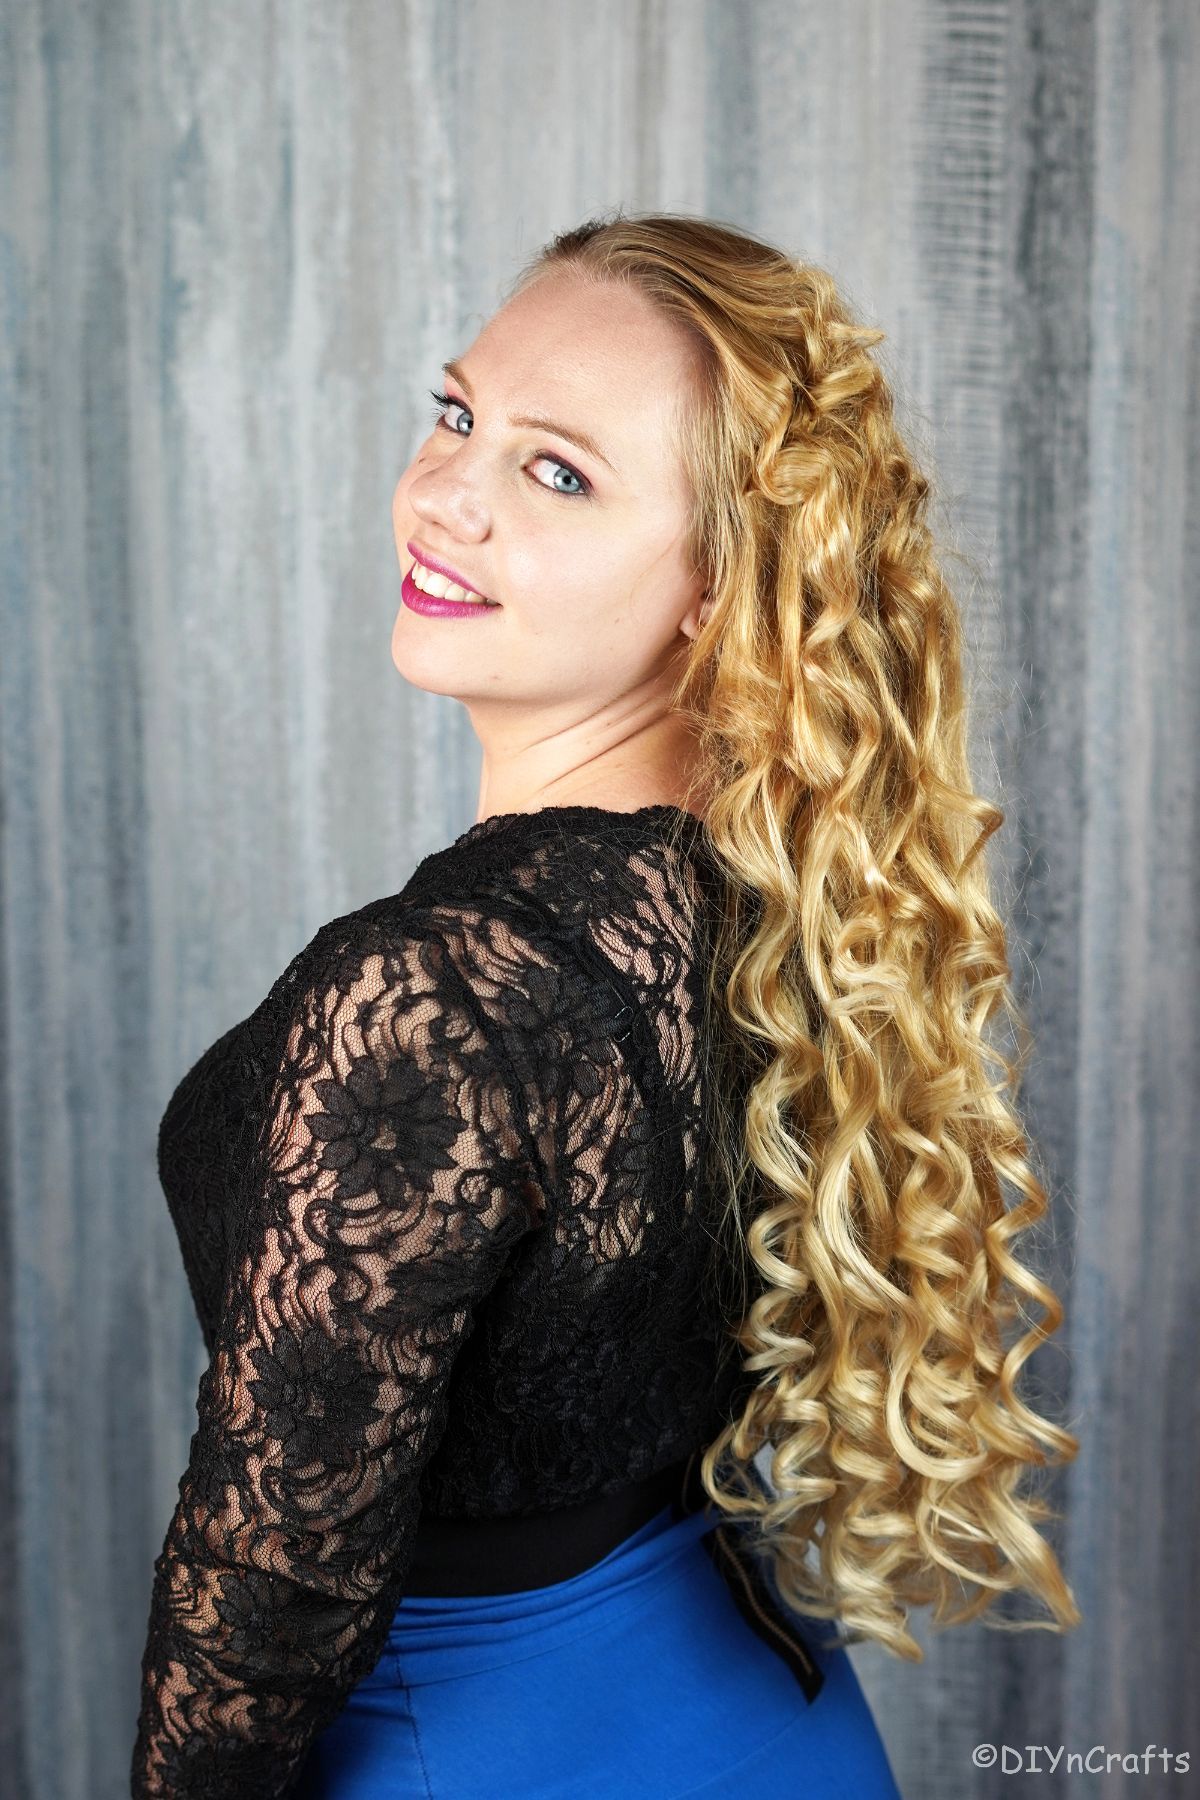 woman looking over her shoulder wearing a black lace shirt with long blonde curls